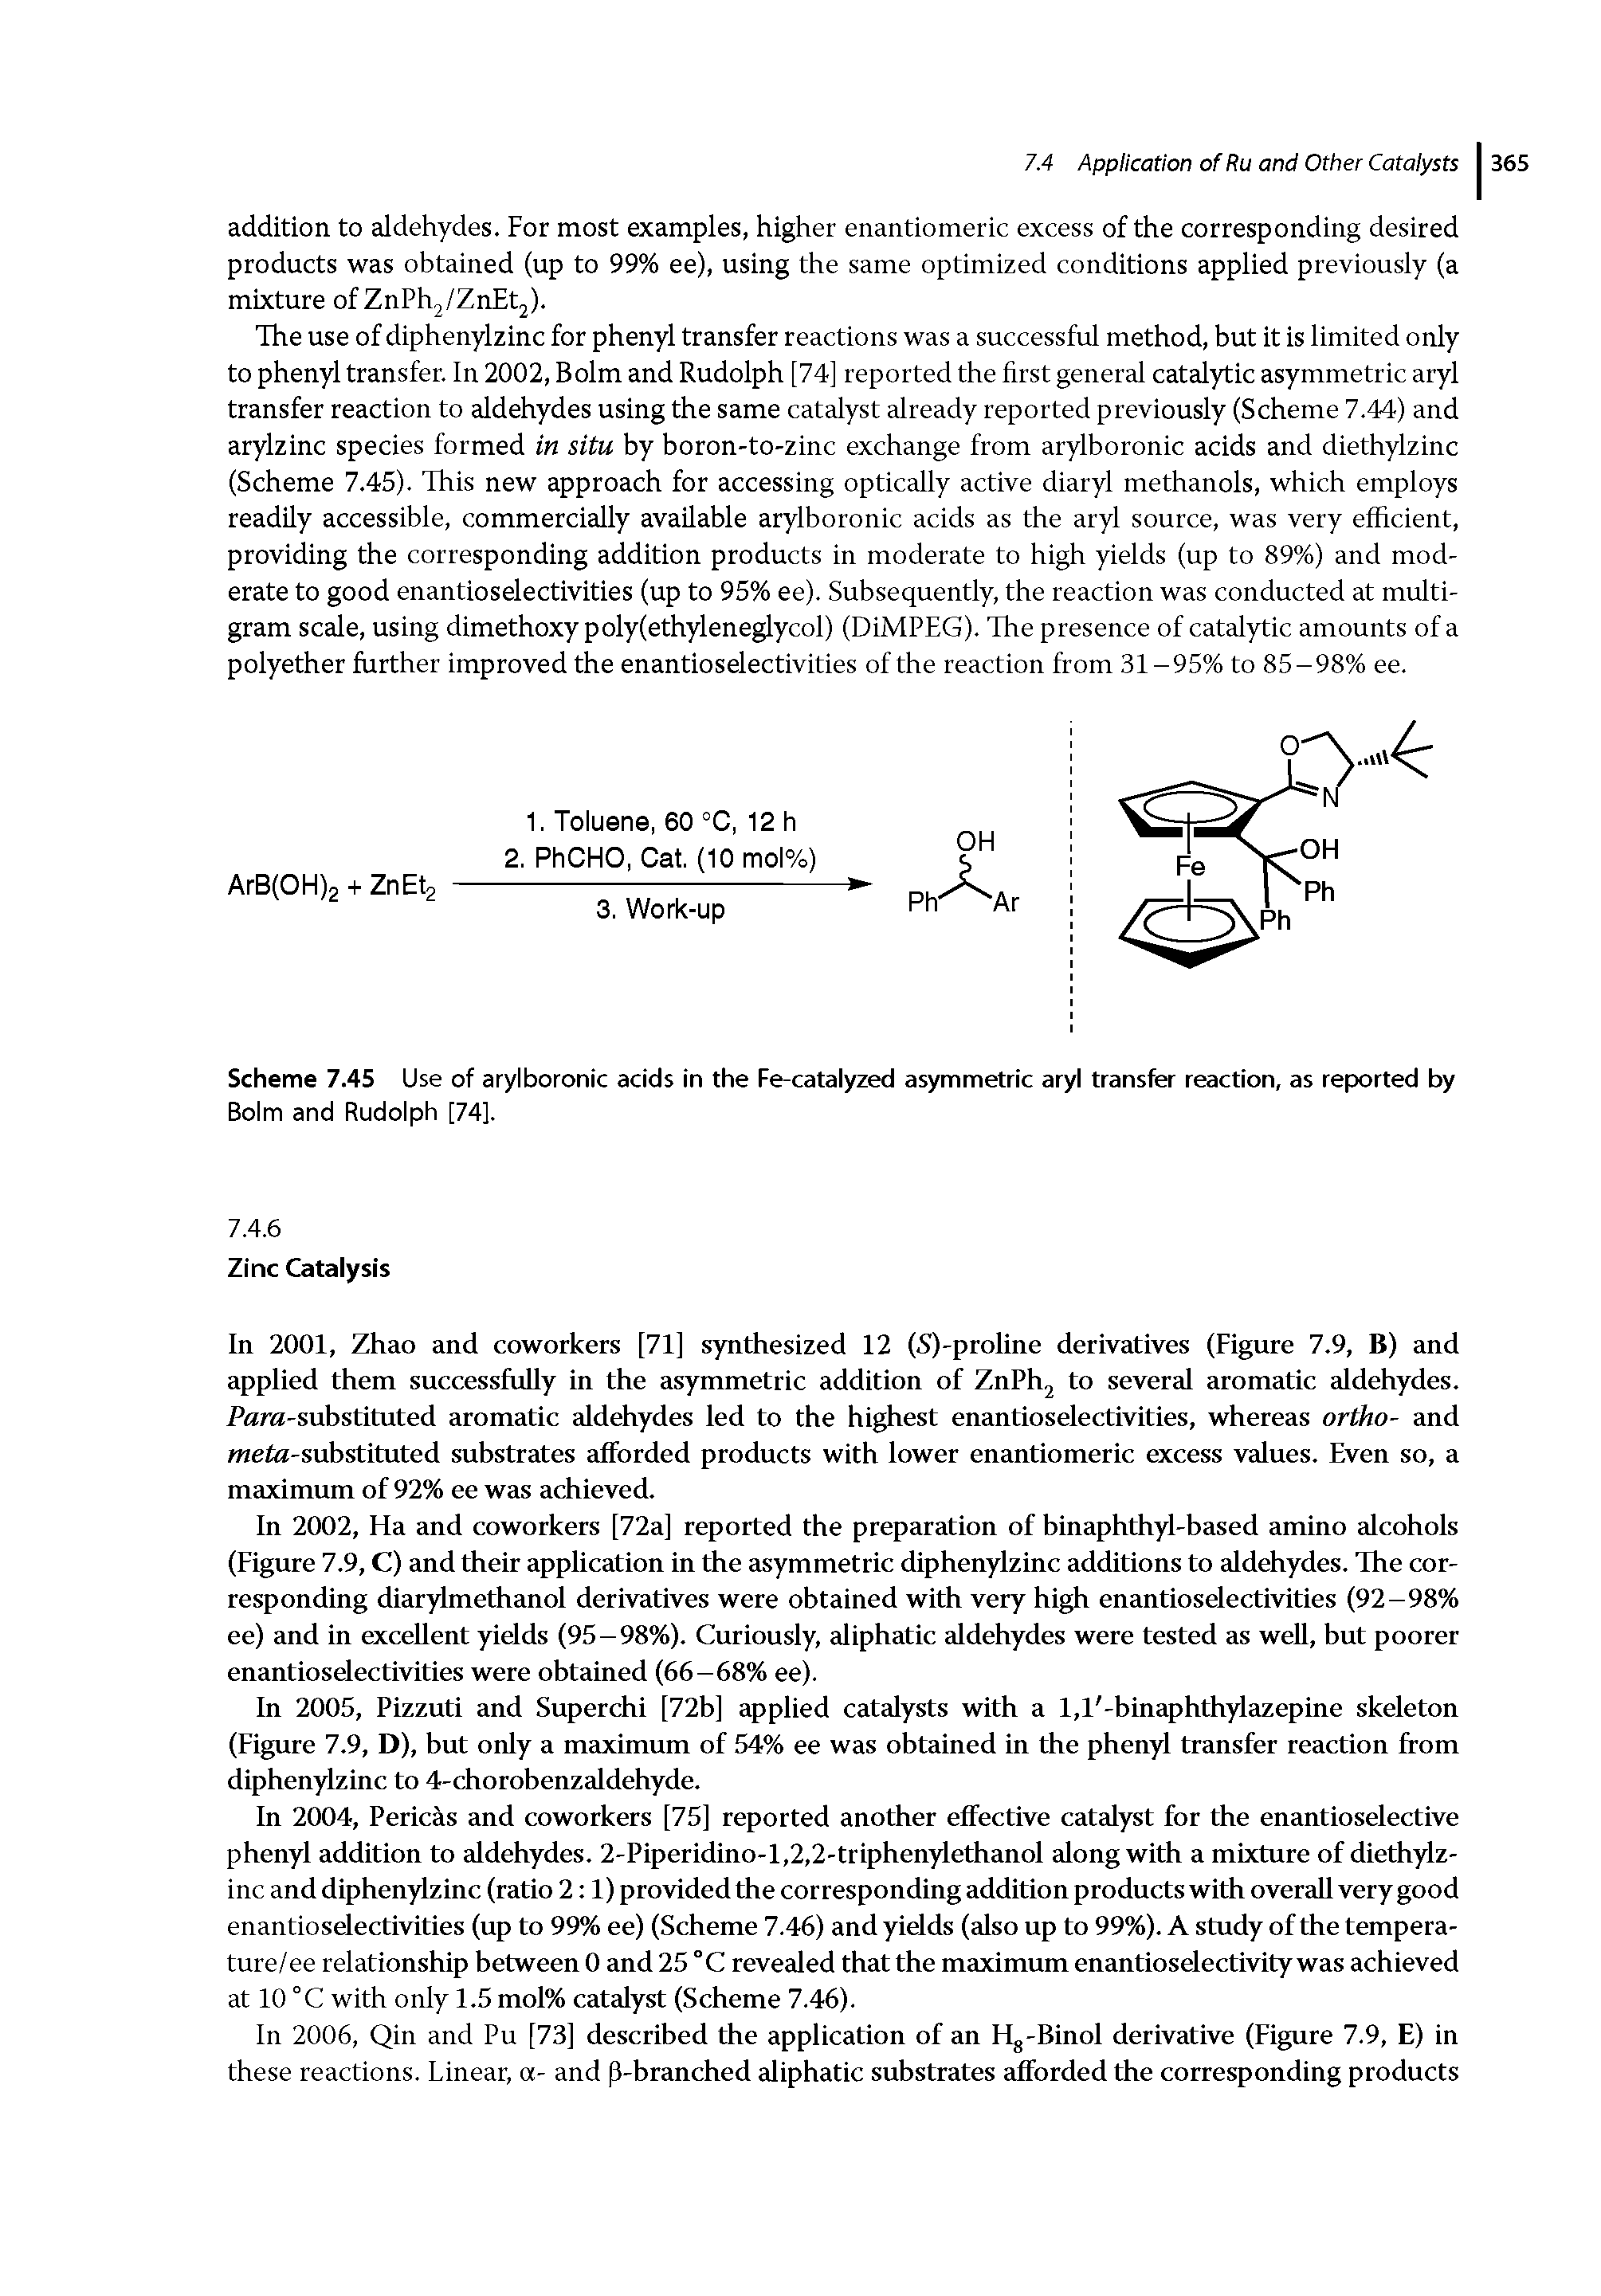 Scheme 7.45 Use of arylboronic acids in the Fe-catalyzed asymmetric aryl transfer reaction, as reported by Bolm and Rudolph [74].